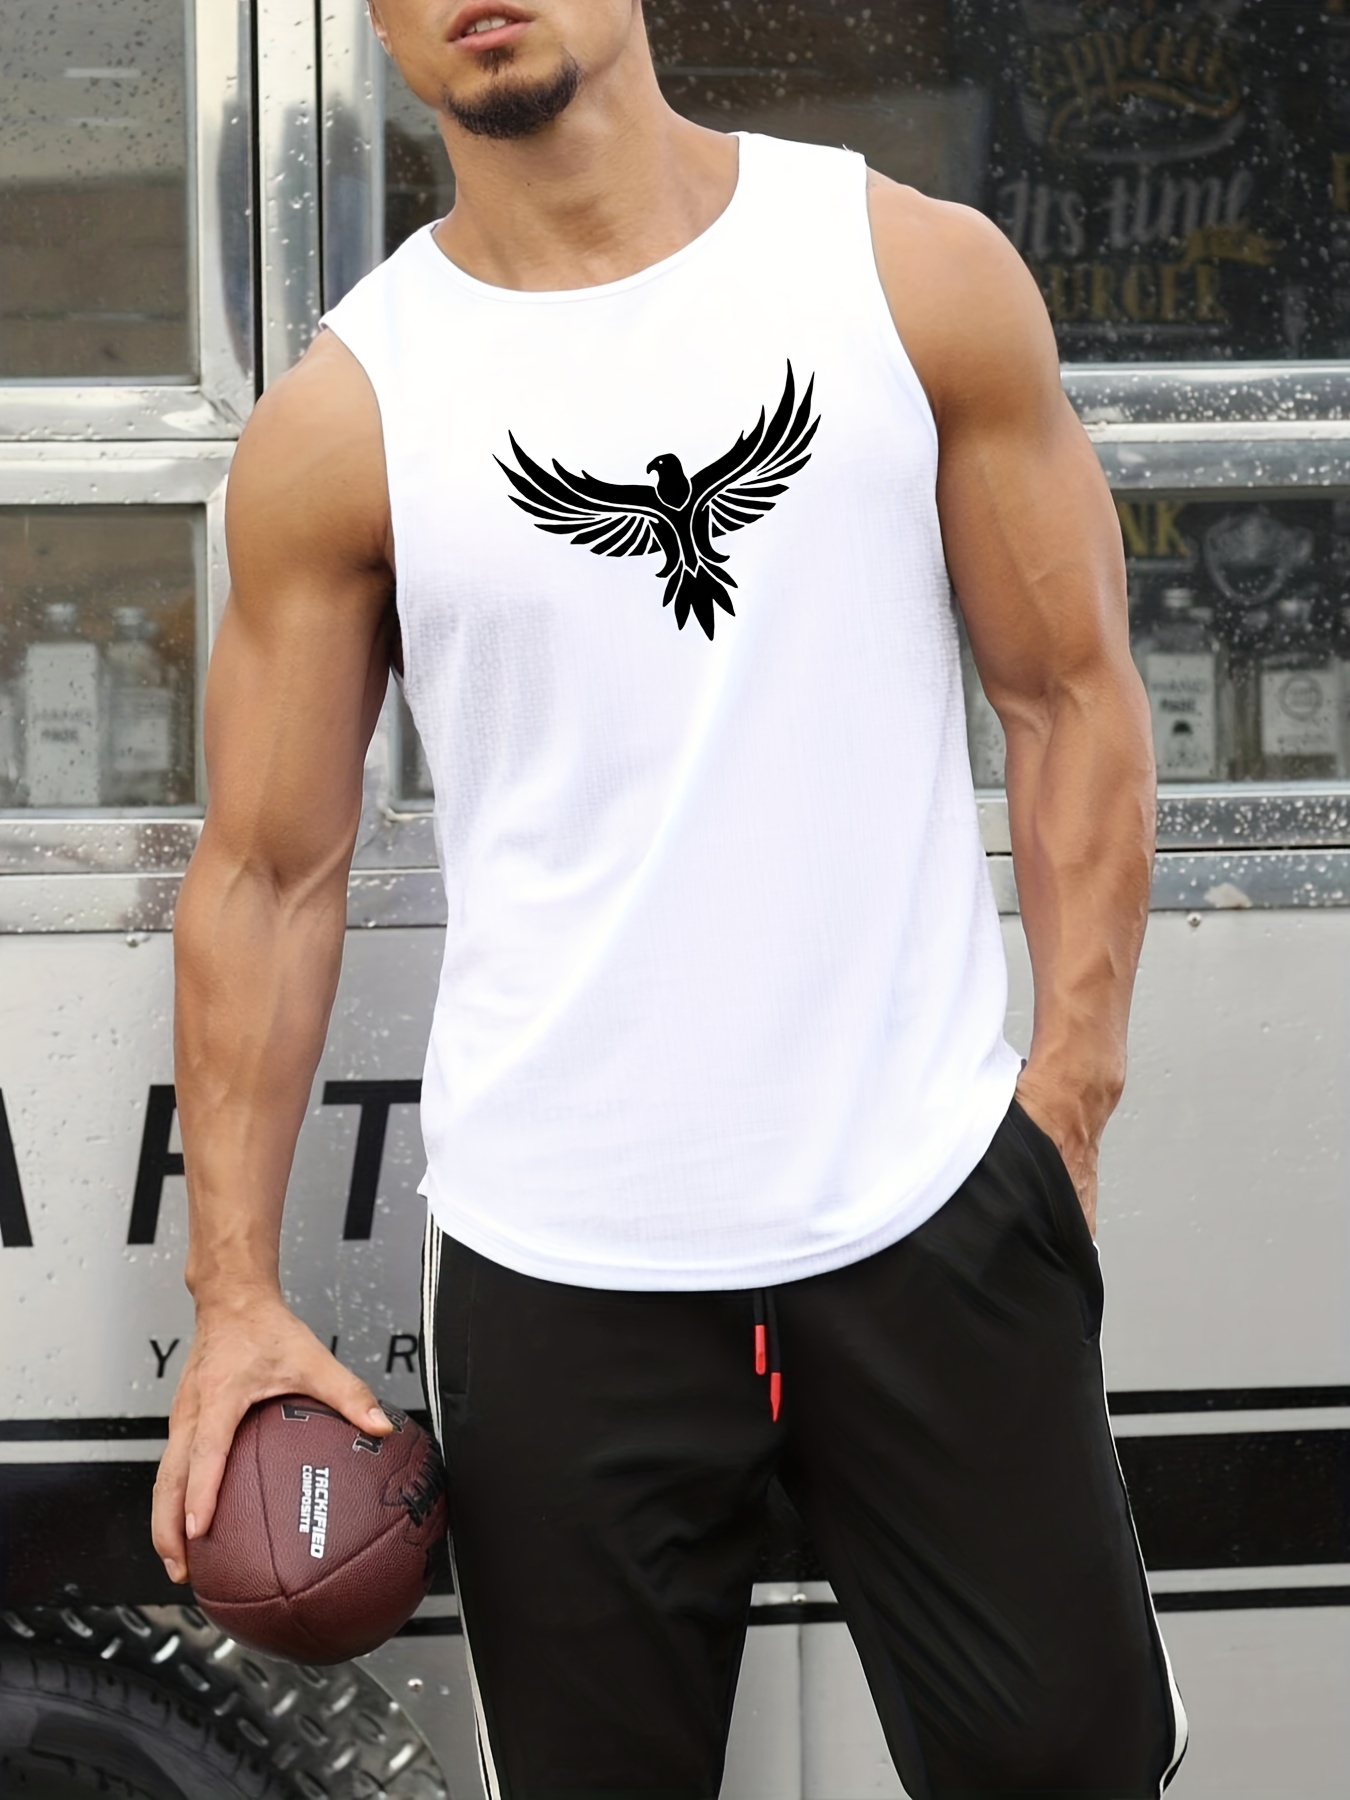 Low Side Breathable Tank Top, Men's Casual Round Neck Tank Top For Summer  Gym Workout Training